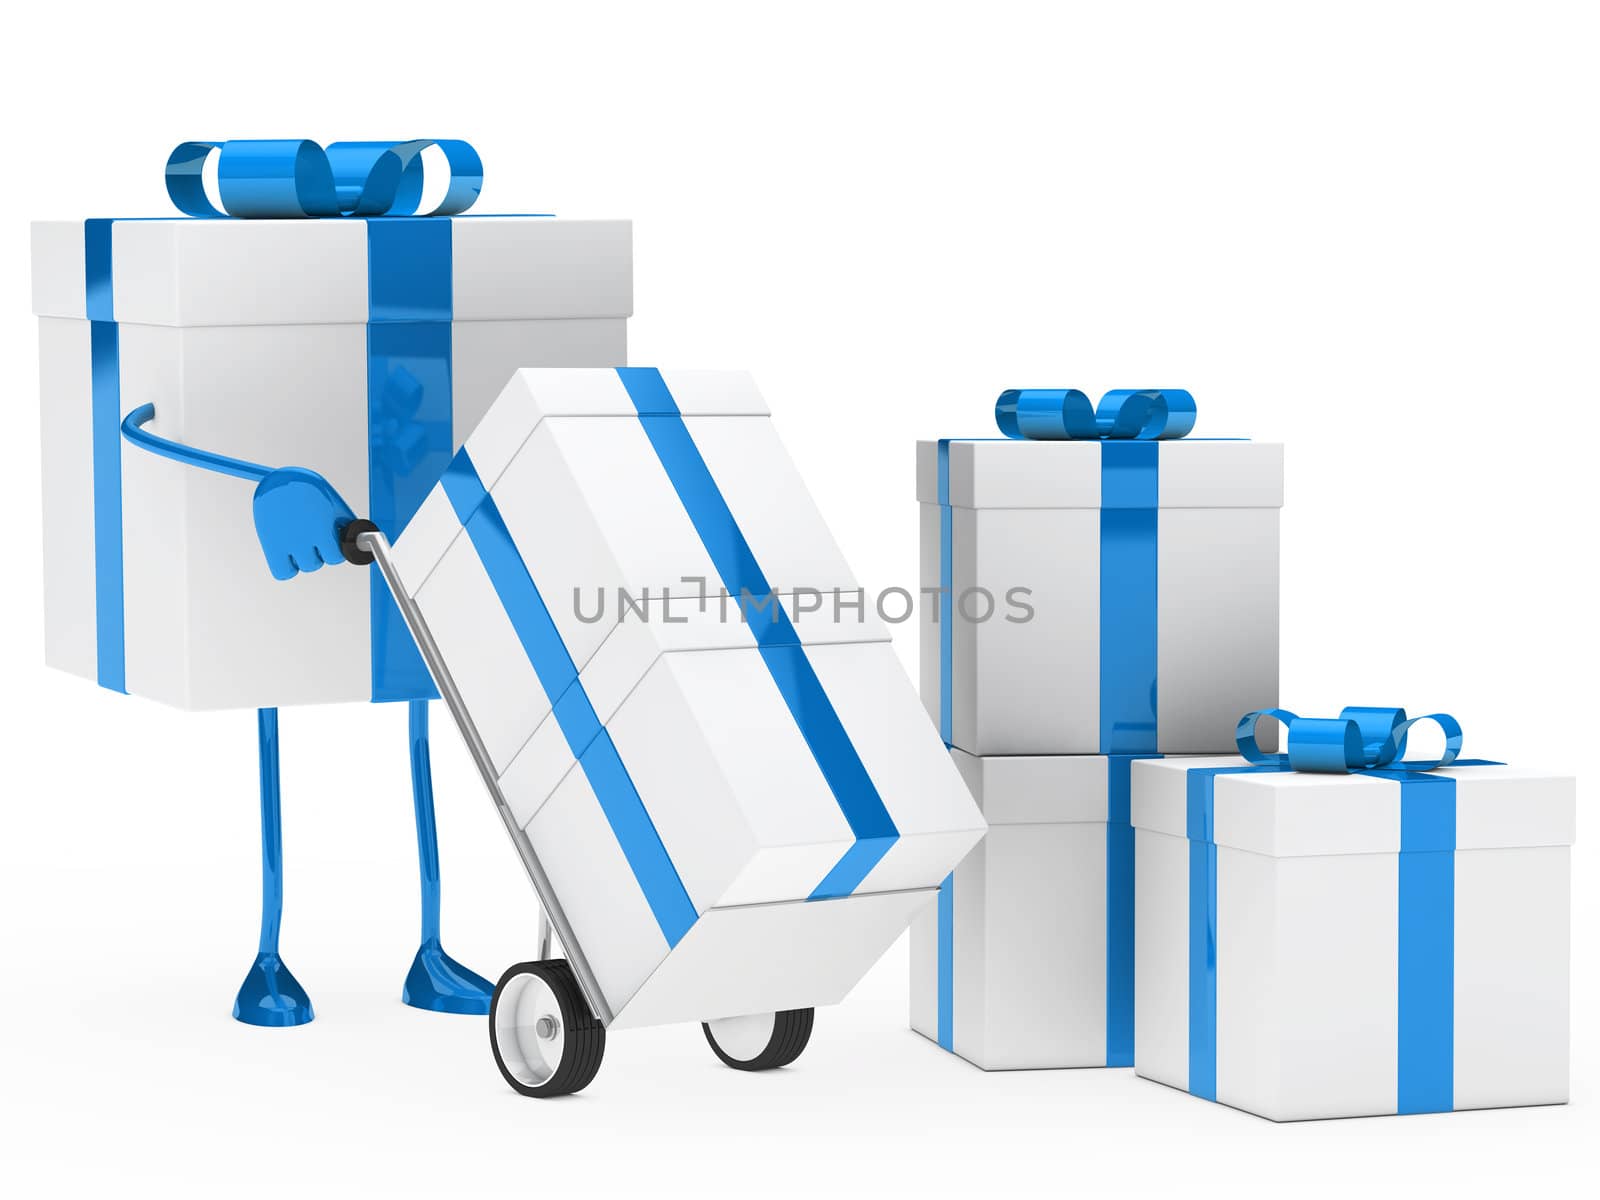 blue christmas gift box hold hand truck